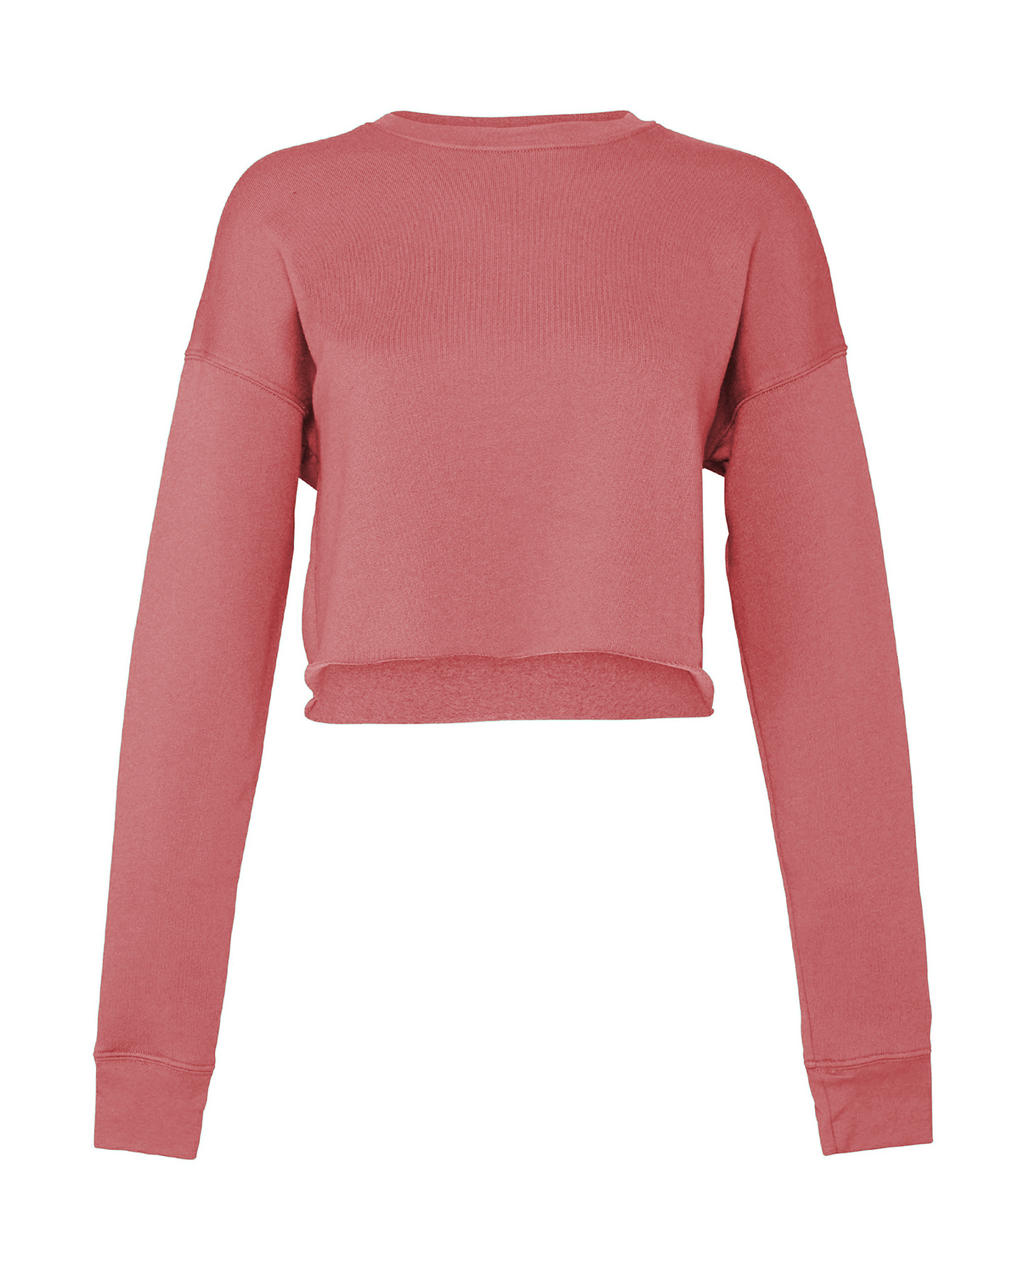  Womens Cropped Crew Fleece in Farbe Mauve